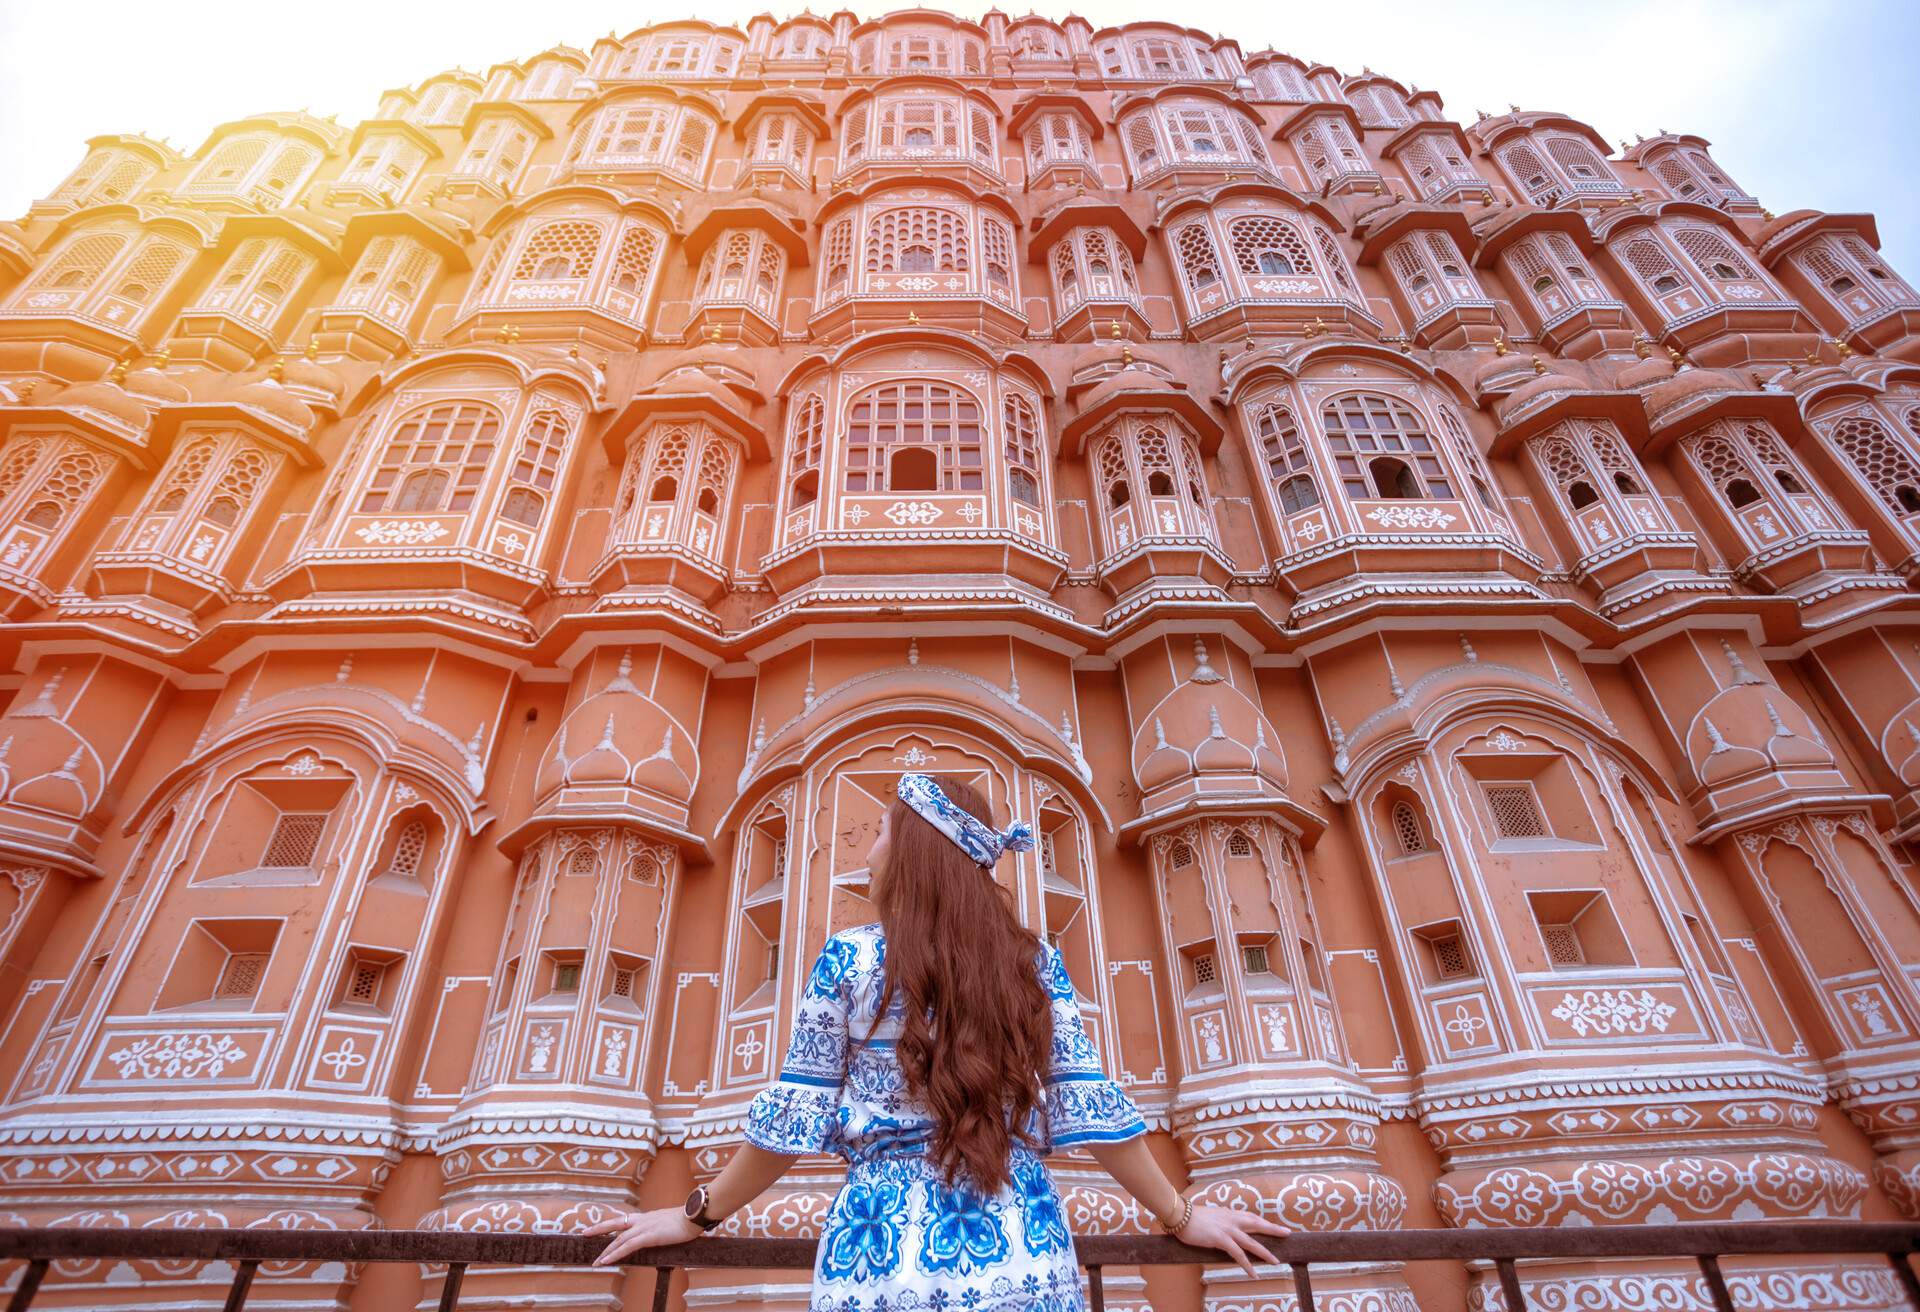 Young Woman during Sunset at Hawa Mahal, Jaipur,Rajasthan, India; Shutterstock ID 1480940000; purchase_order: ; job: KAYAK; client: ; other: